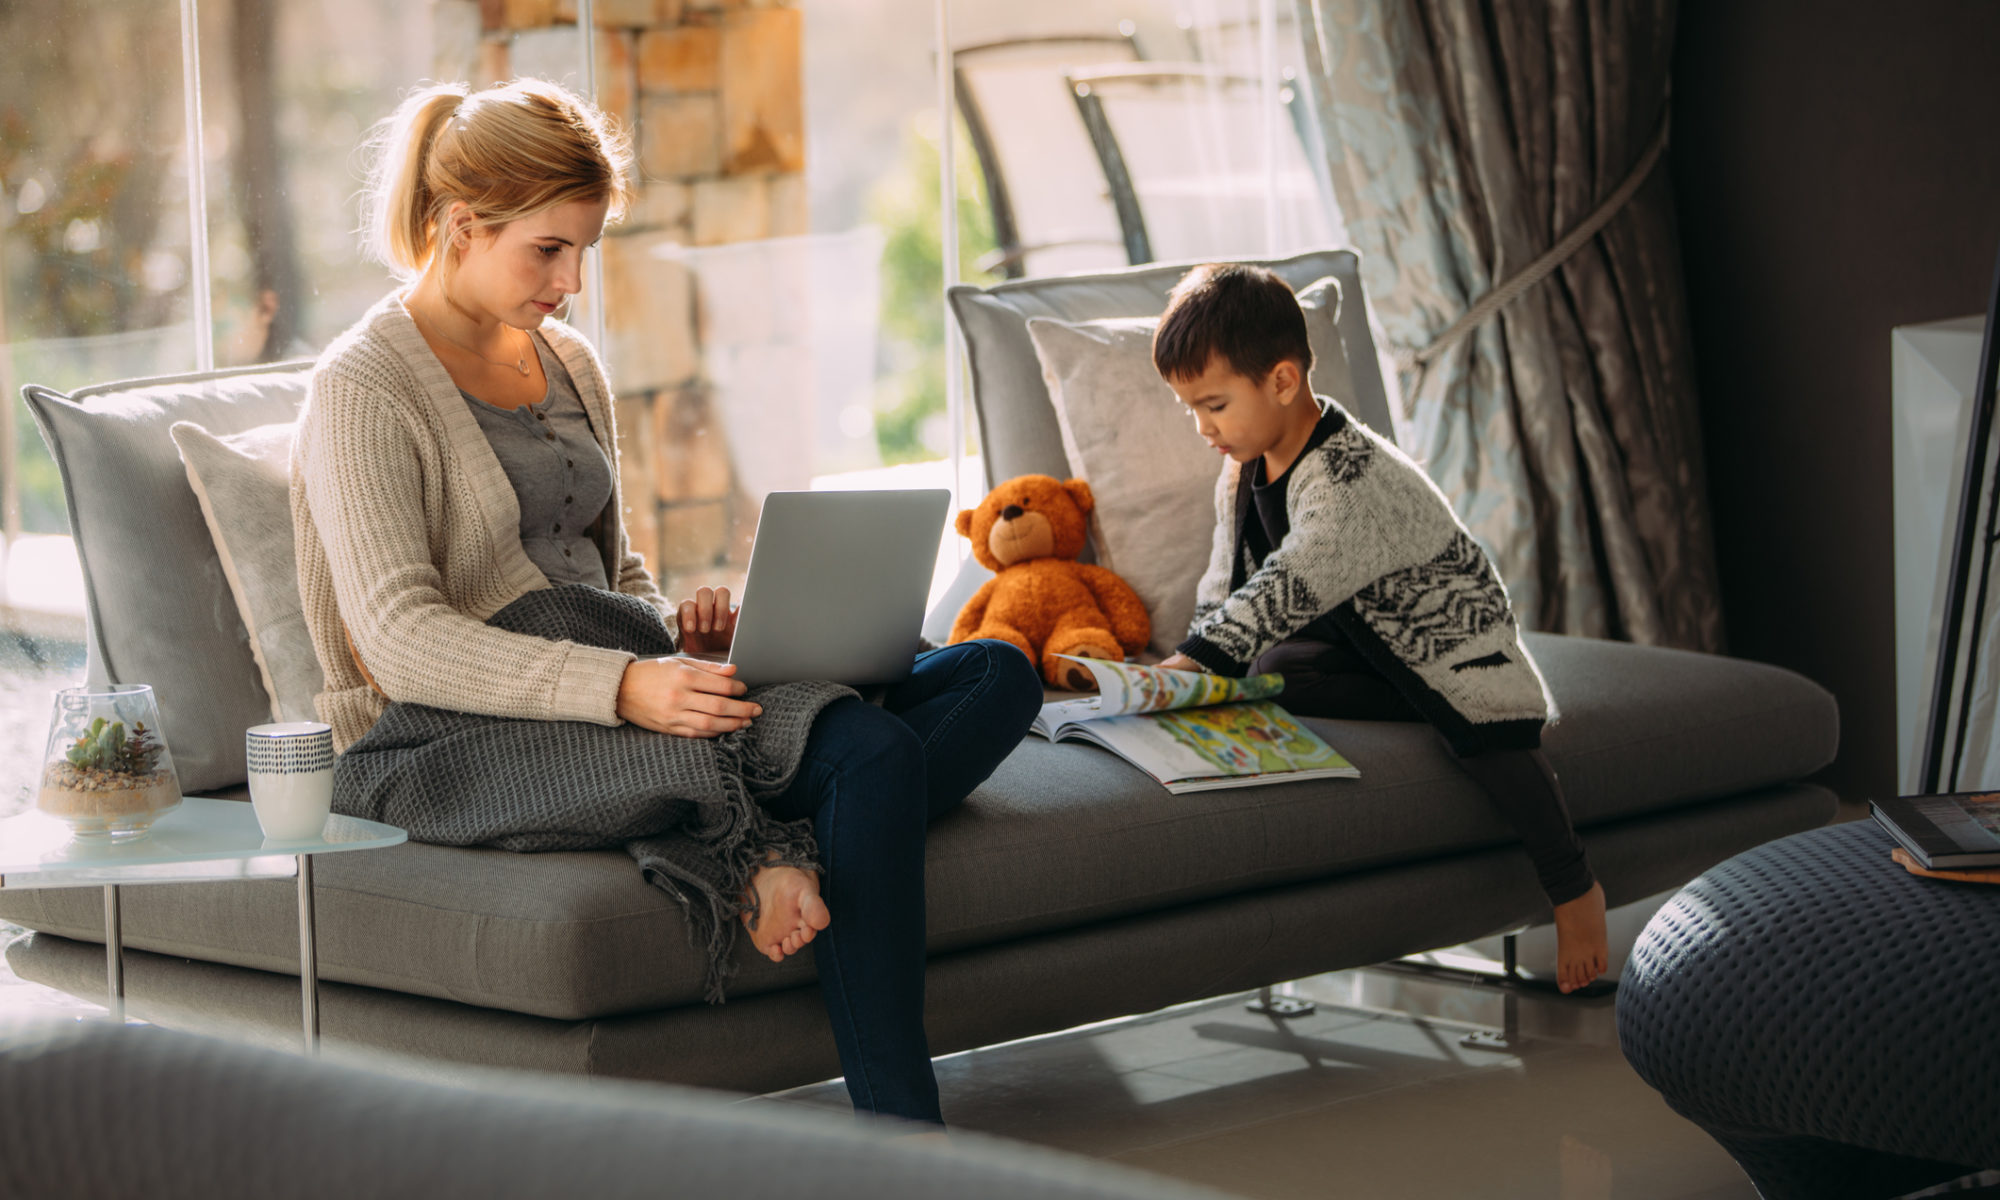 Working woman on laptop trying to make her website look more professional with her son reading a storybook. Both sitting on a grey sofa in a living room.